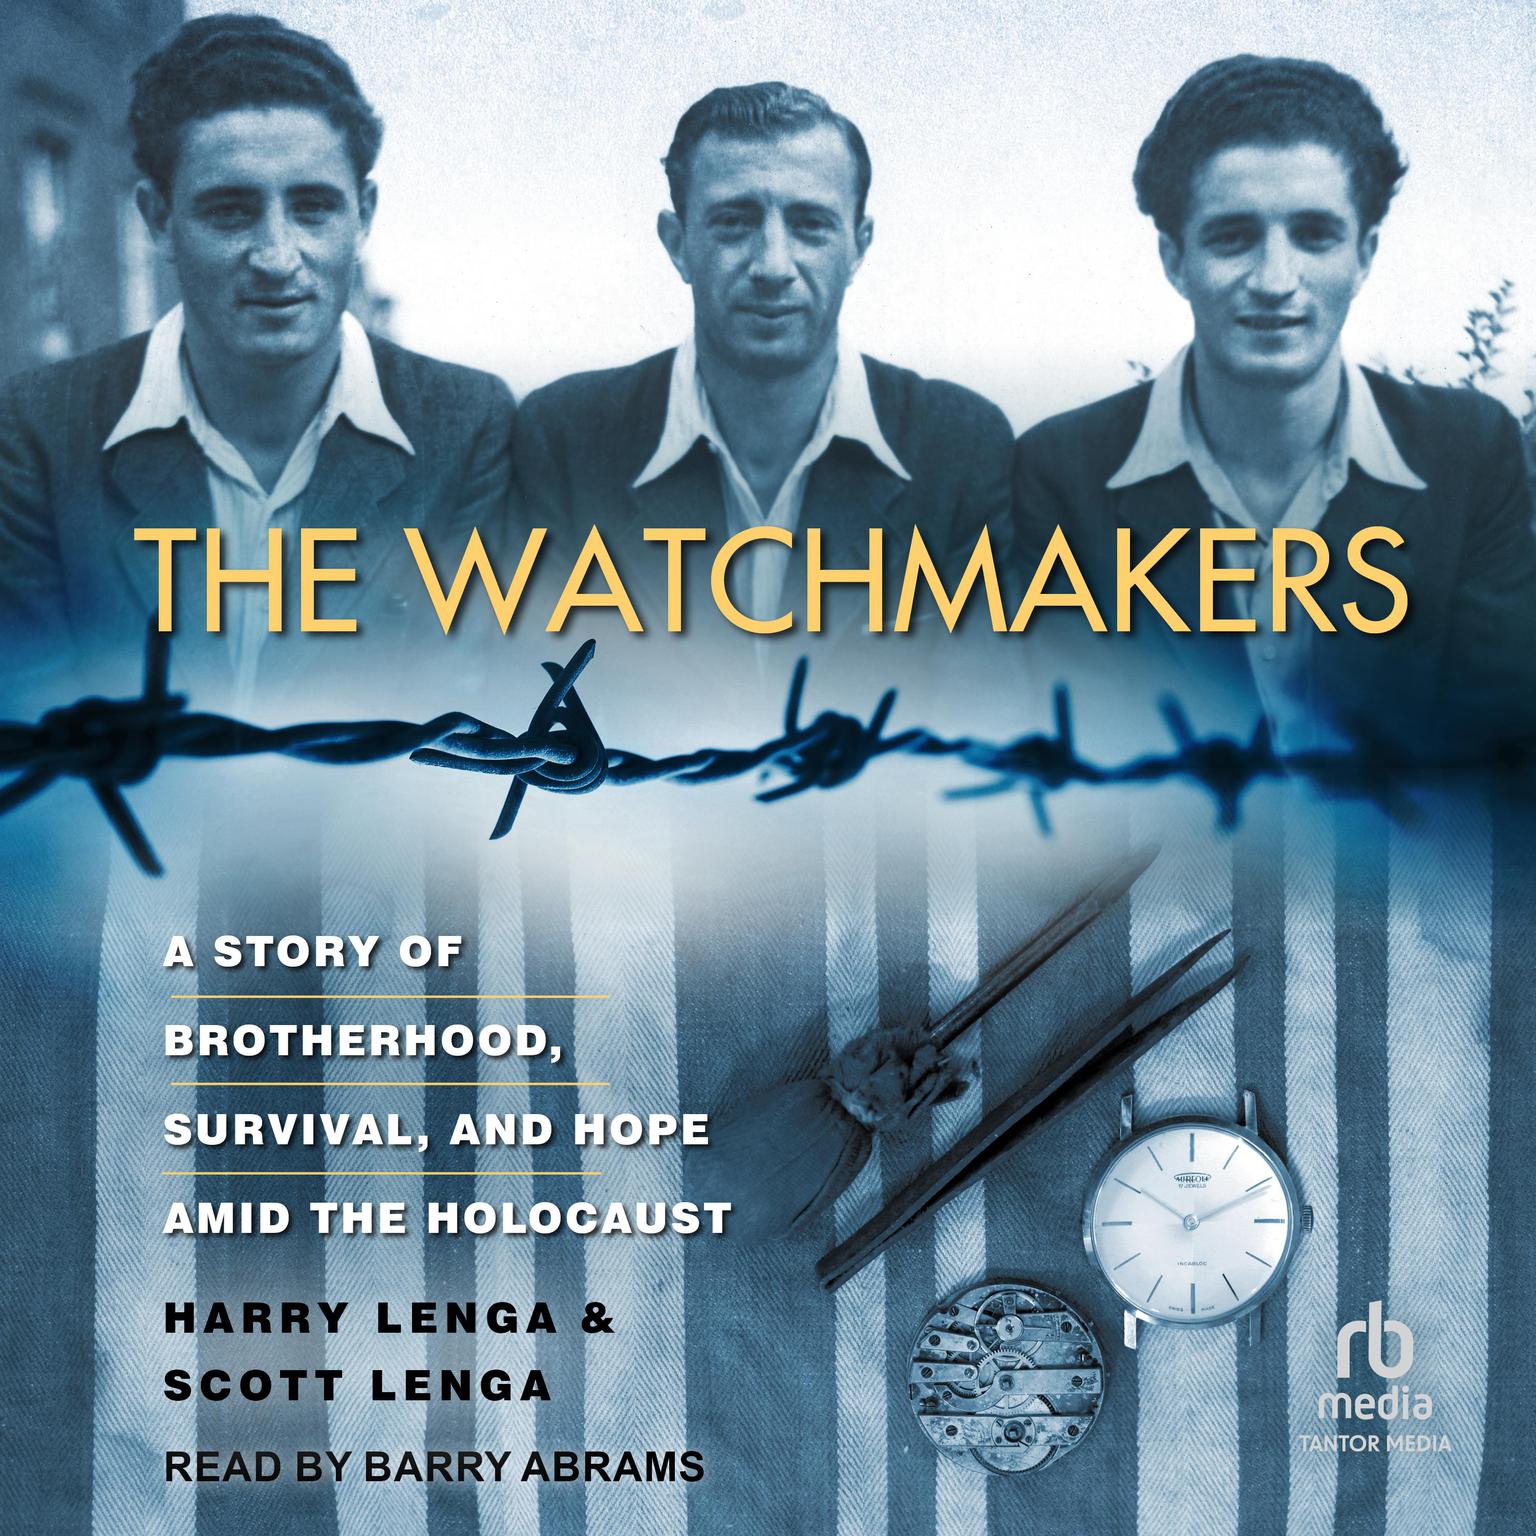 The Watchmakers: A Powerful WW2 Story of Brotherhood, Survival, and Hope Amid the Holocaust Audiobook, by Harry Lenga